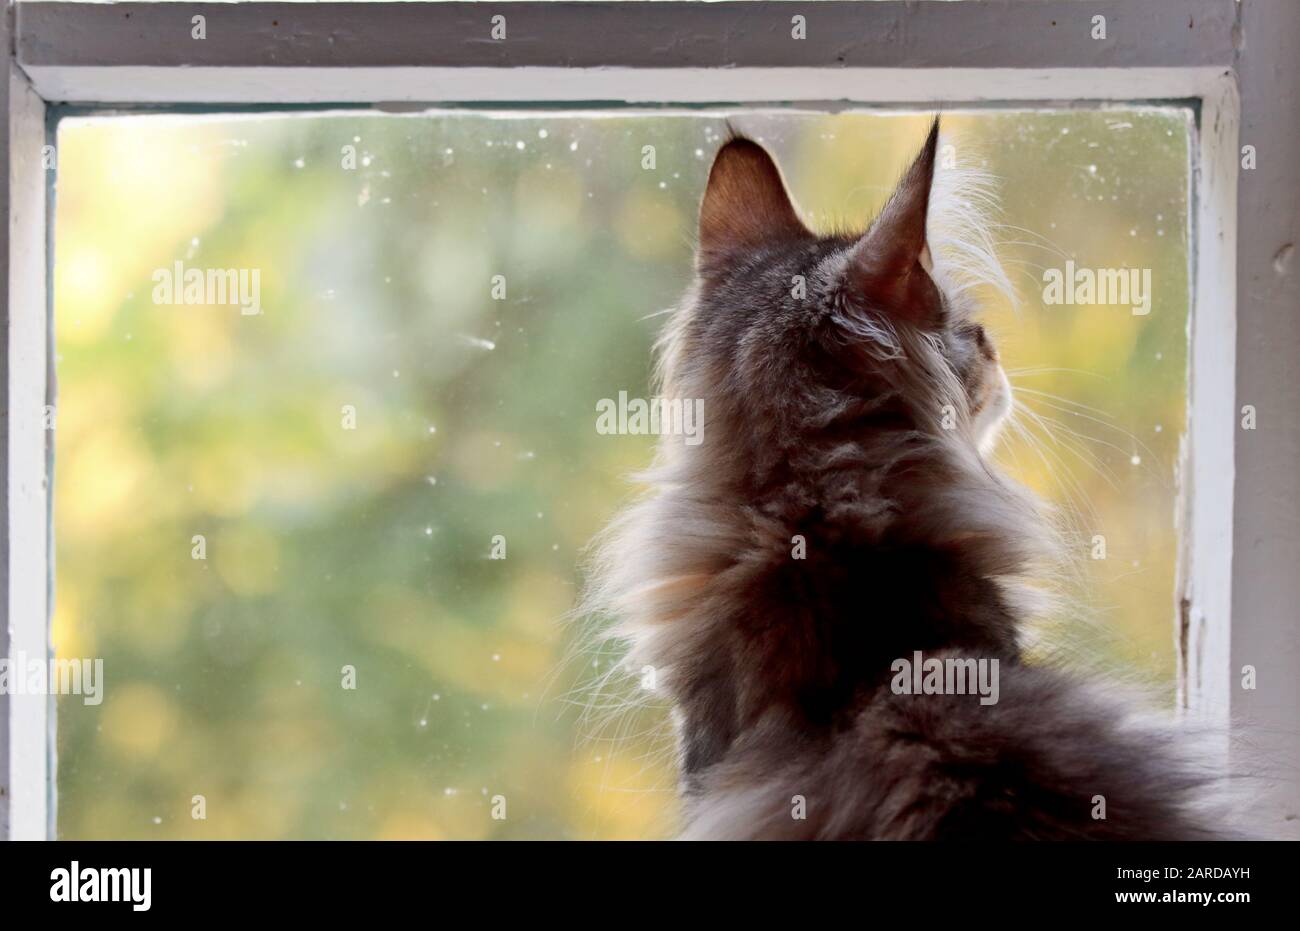 A small norwegian forest cat kitten sits by a dirty window in a back view looking out Stock Photo